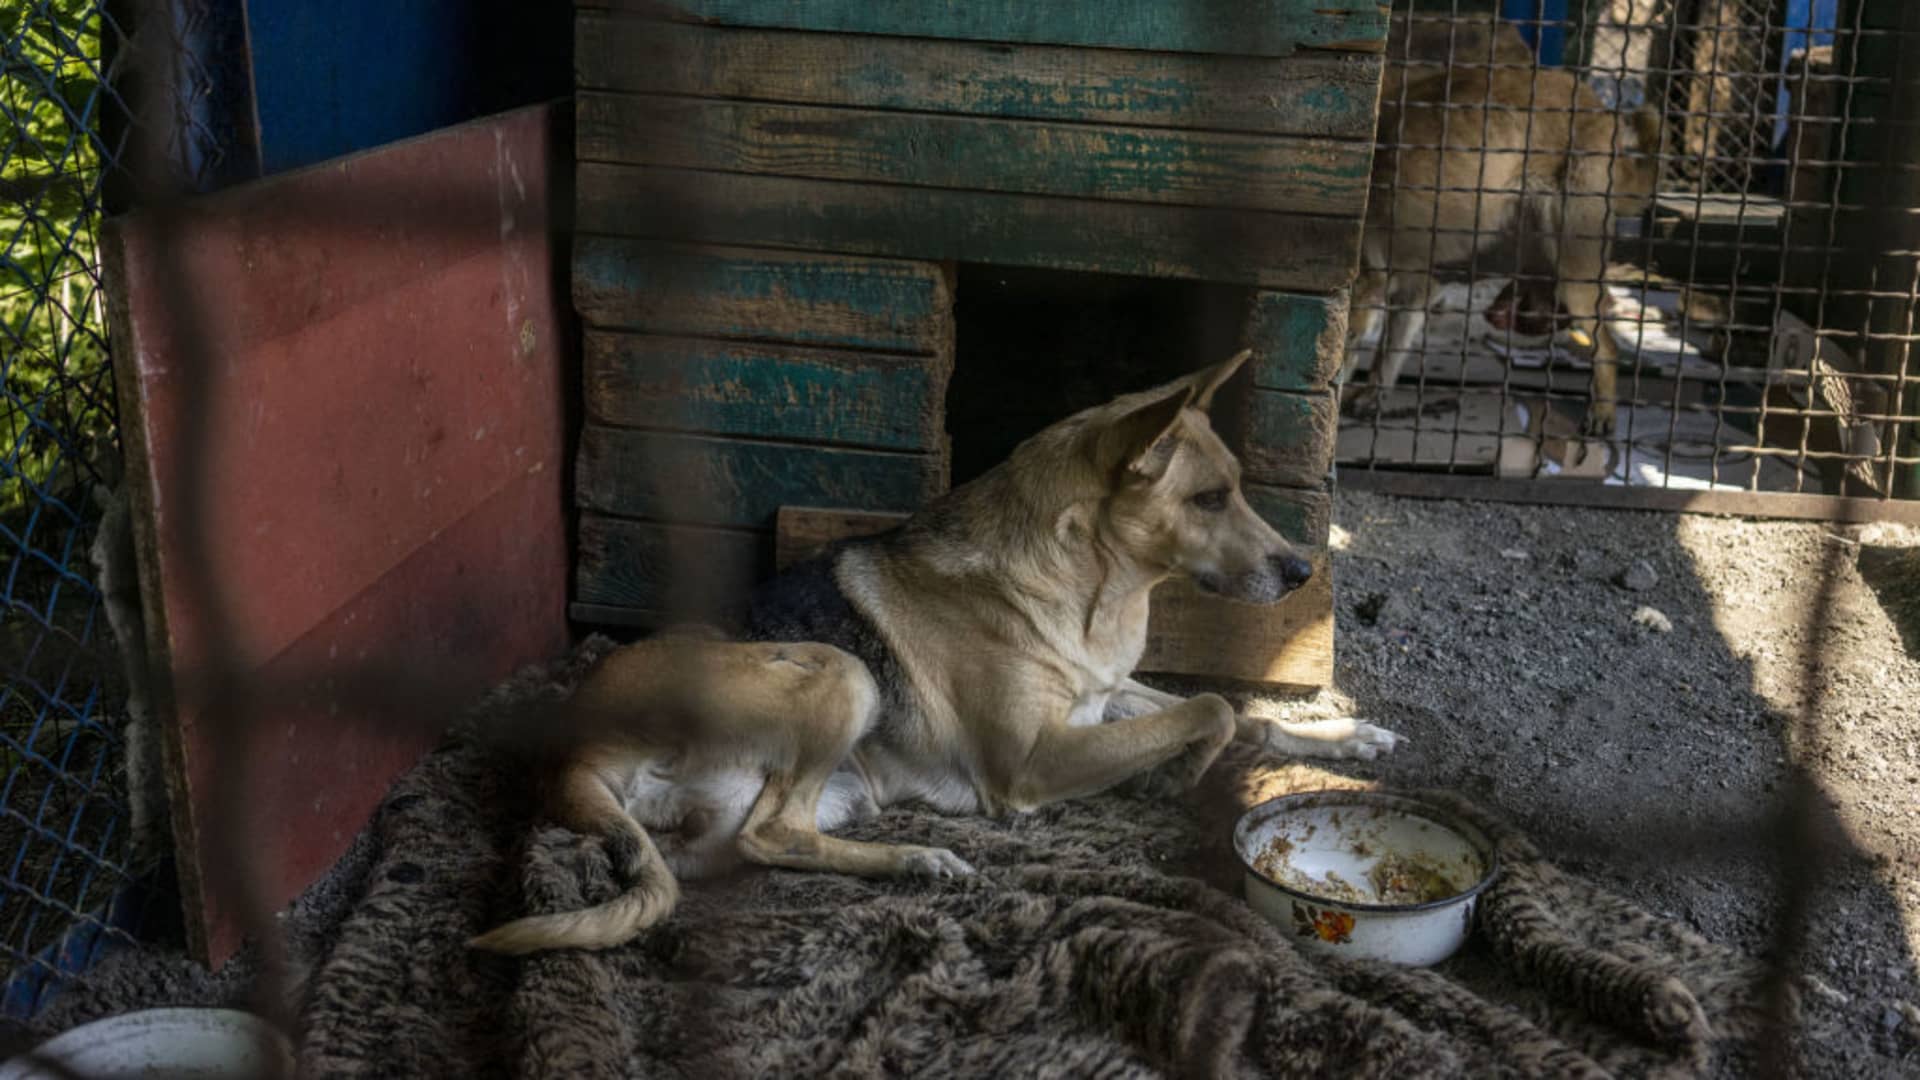 KRAMATORSK, UKRAINE - JULY 25: A dog brought from Bakhmut sits in his cage at the shelter of 'Society for the Protection of Animals Charitable Foundation' in Kramatorsk, Ukraine on July 26, 2023. In the shelter there are currently 30 dogs and 15 cats all of them rescued from the eastern battle front of Ukraine like Bakhmut, New York, Kostyantynivka, and Chasiv Yar. The organization have been working in Kramatorsk since 2010. The organization relies heavily on donations for food, accommodation and veterinary expenses. (Photo by Jose Colon/Anadolu Agency via Getty Images)